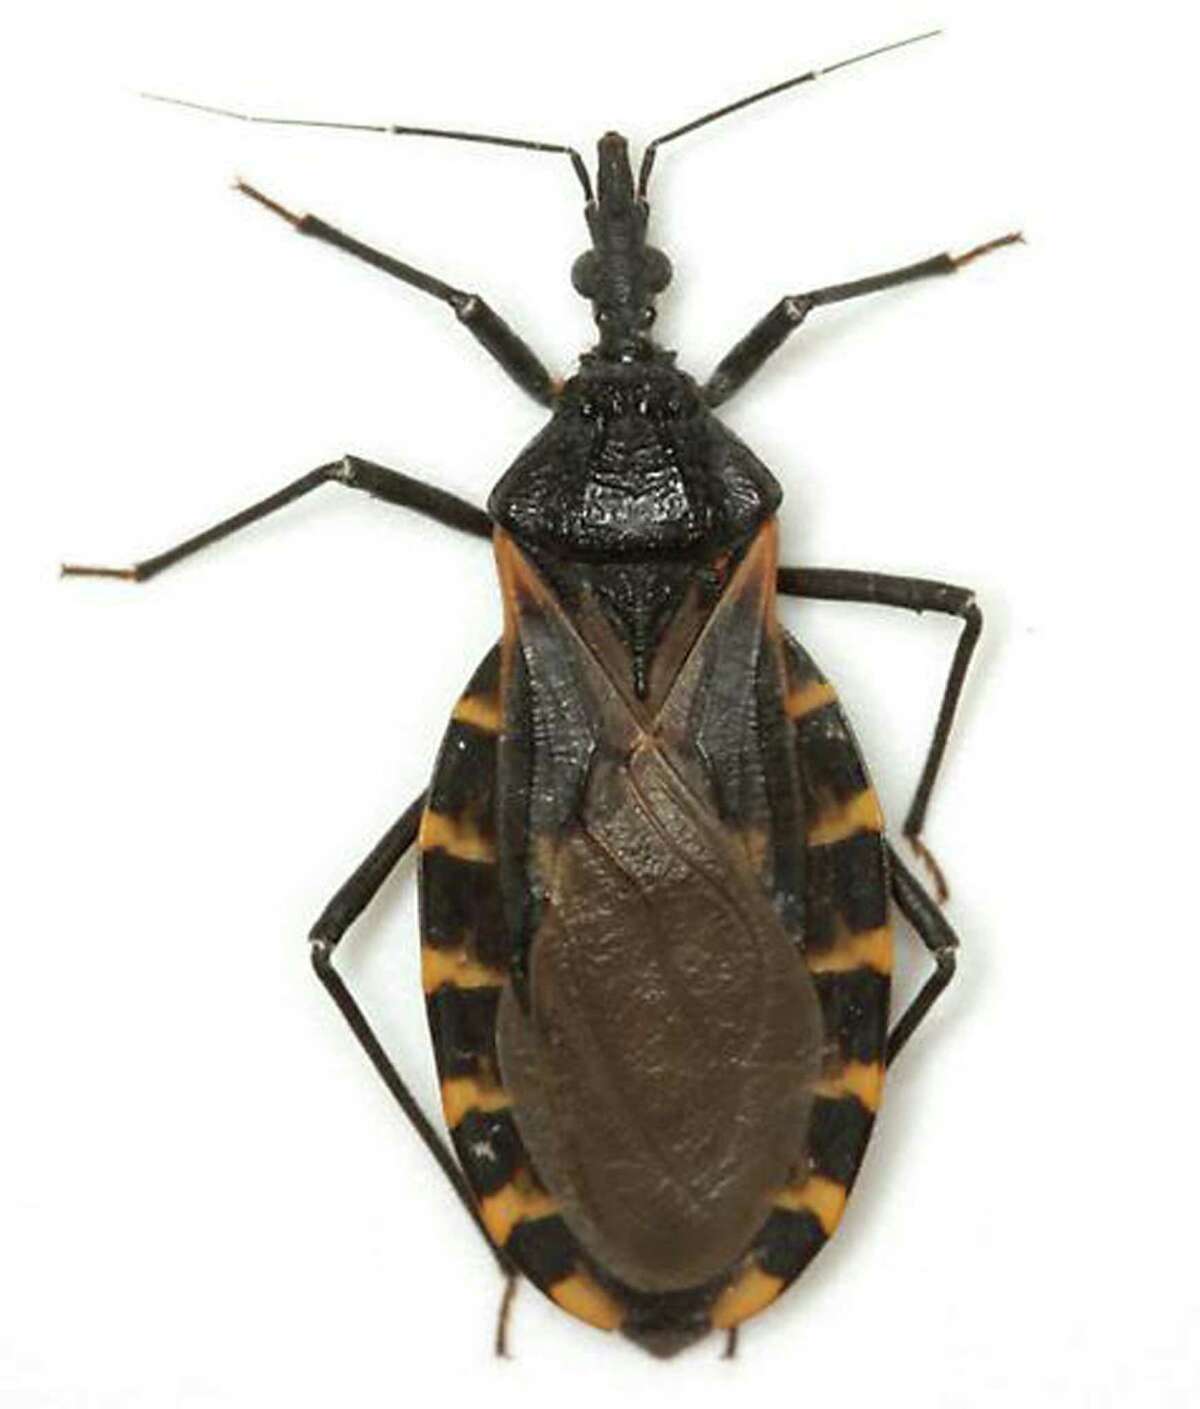 Chagas disease is caused by a parasite known as Trypanosoma Cruzi, which can be carried by the Triatomine Bug or “Kissing Bug.” The San Antonio Humane Society has said they have seen three possible cases of the disease in dogs. Five species of “kissing bugs” in the area carry Chagas disease, and Triatoma gerstaeckeri is the most common. Officials now believe the bug can transmit the disease to humans.